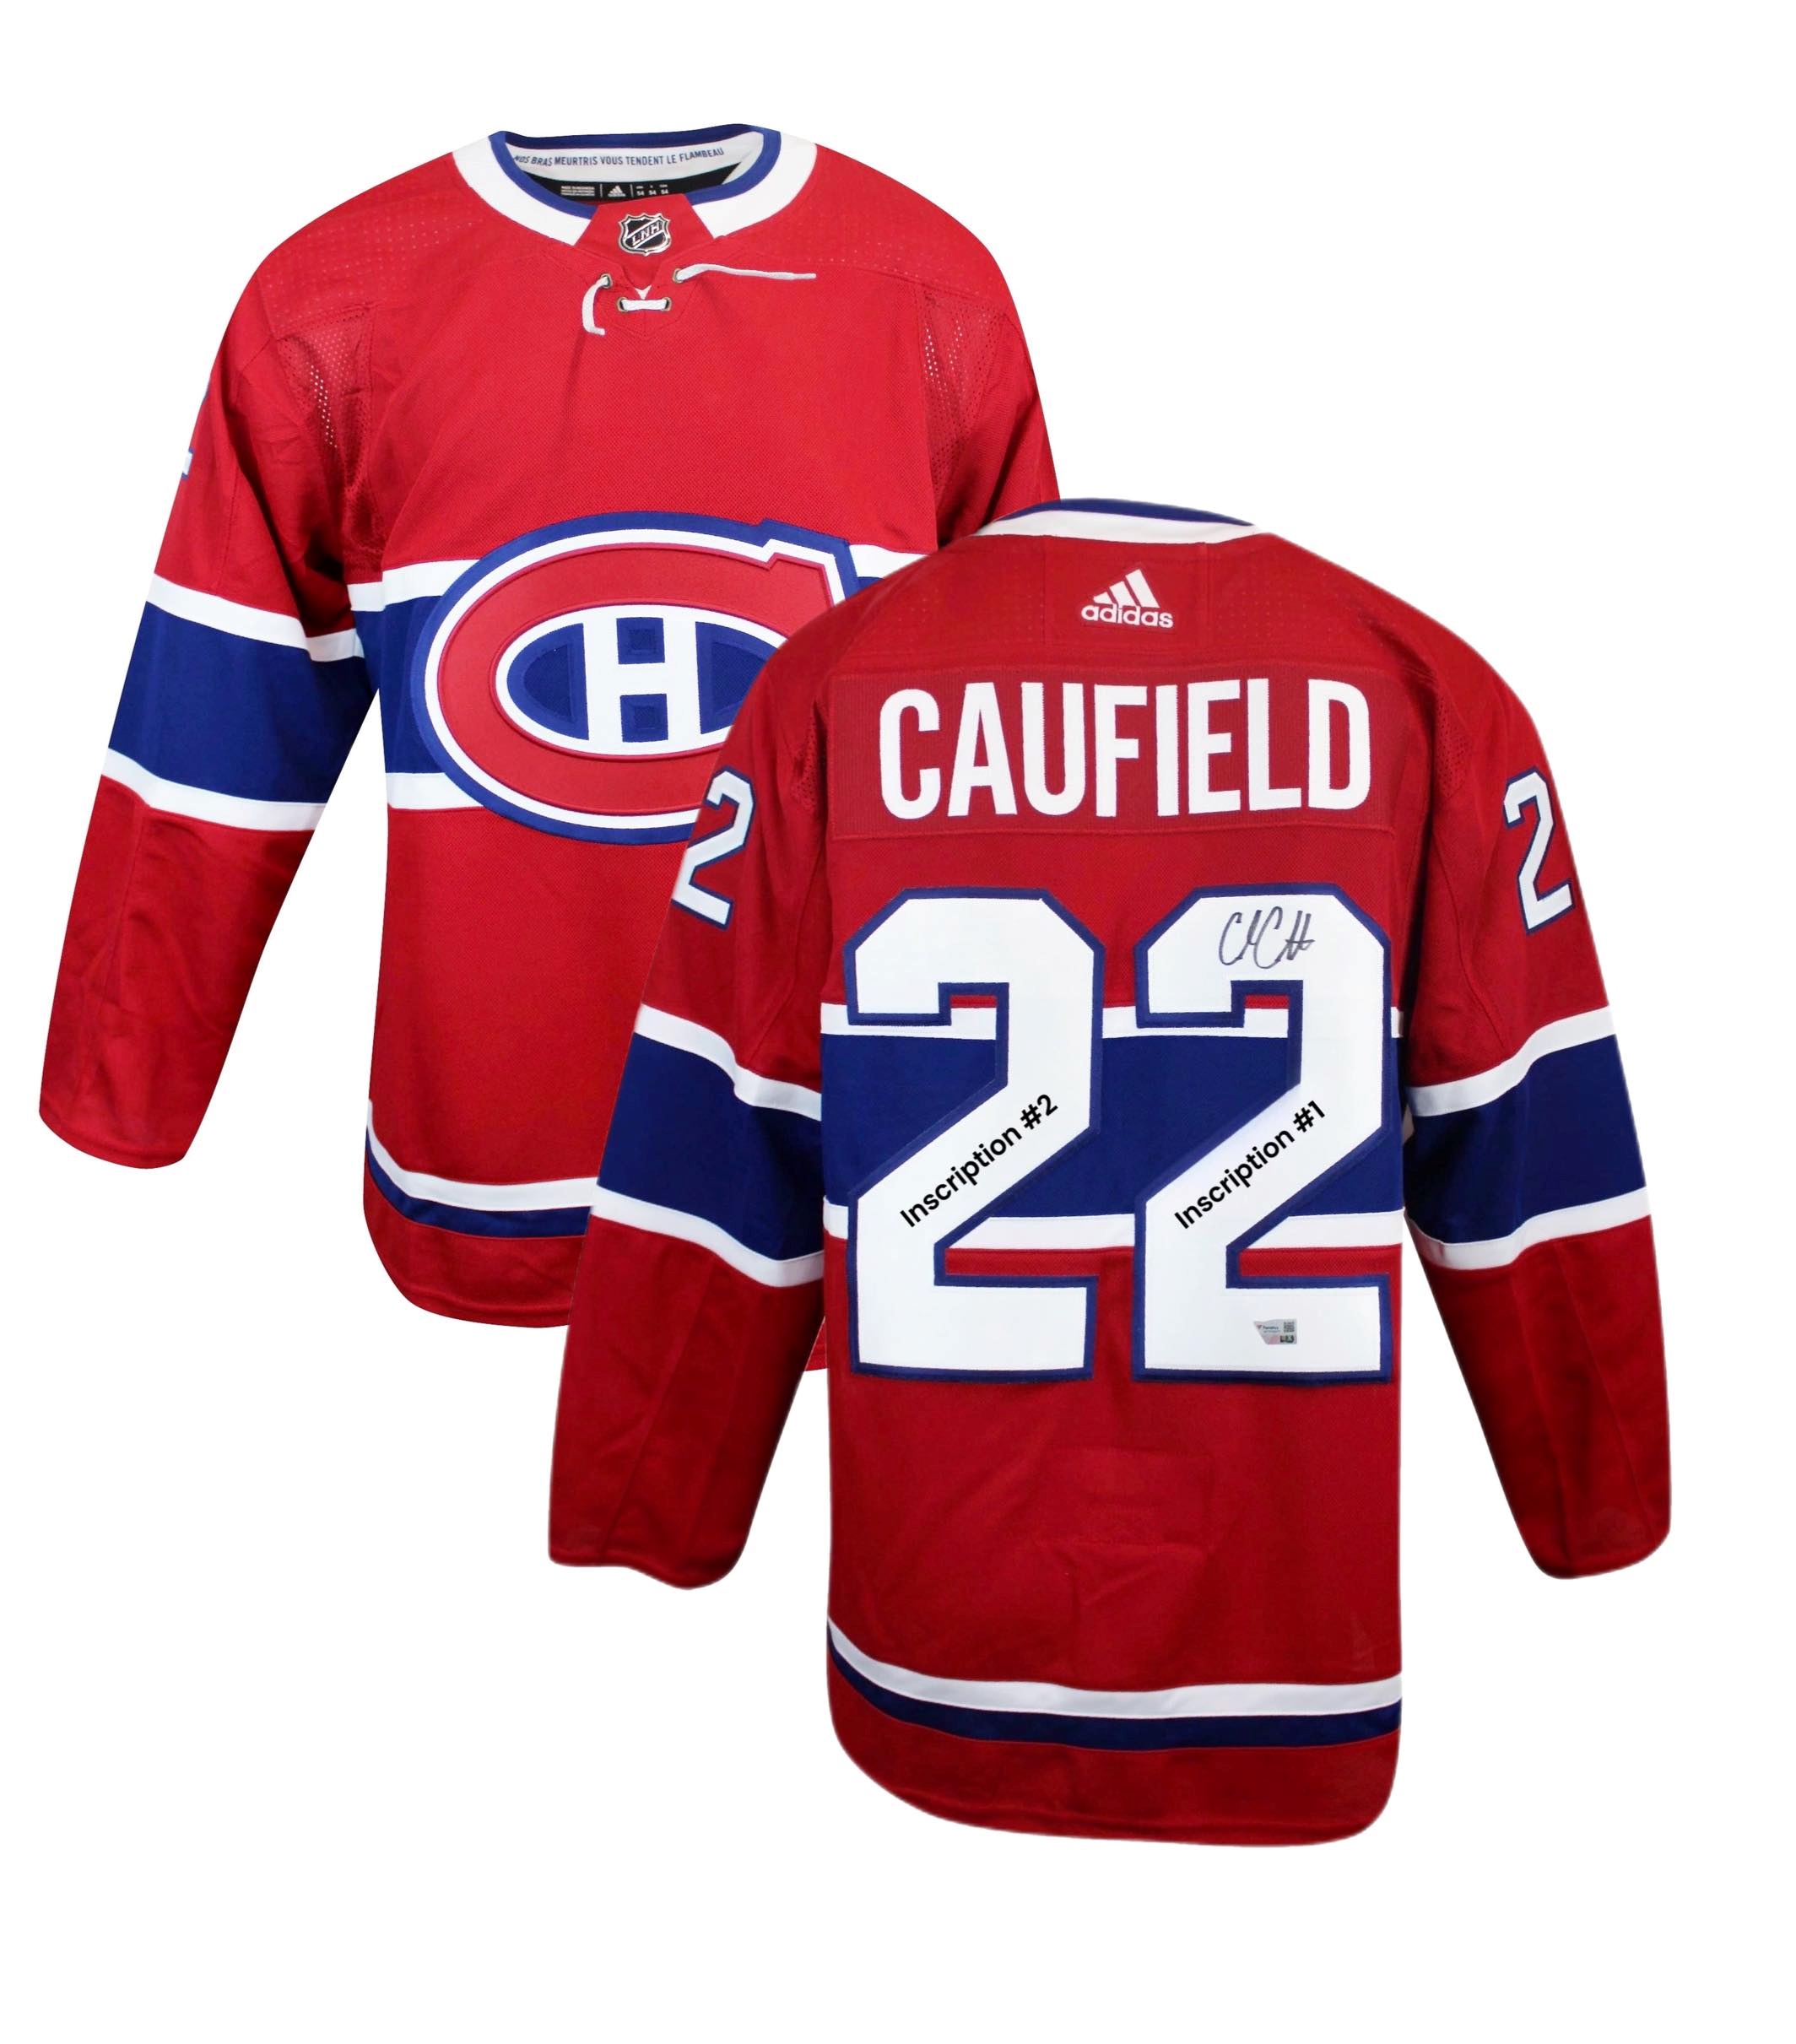 Cole Caufield Montreal Canadiens Fanatics Authentic Autographed adidas  Authentic Jersey with 1st NHL Goal 5-1-21 Inscription - Red